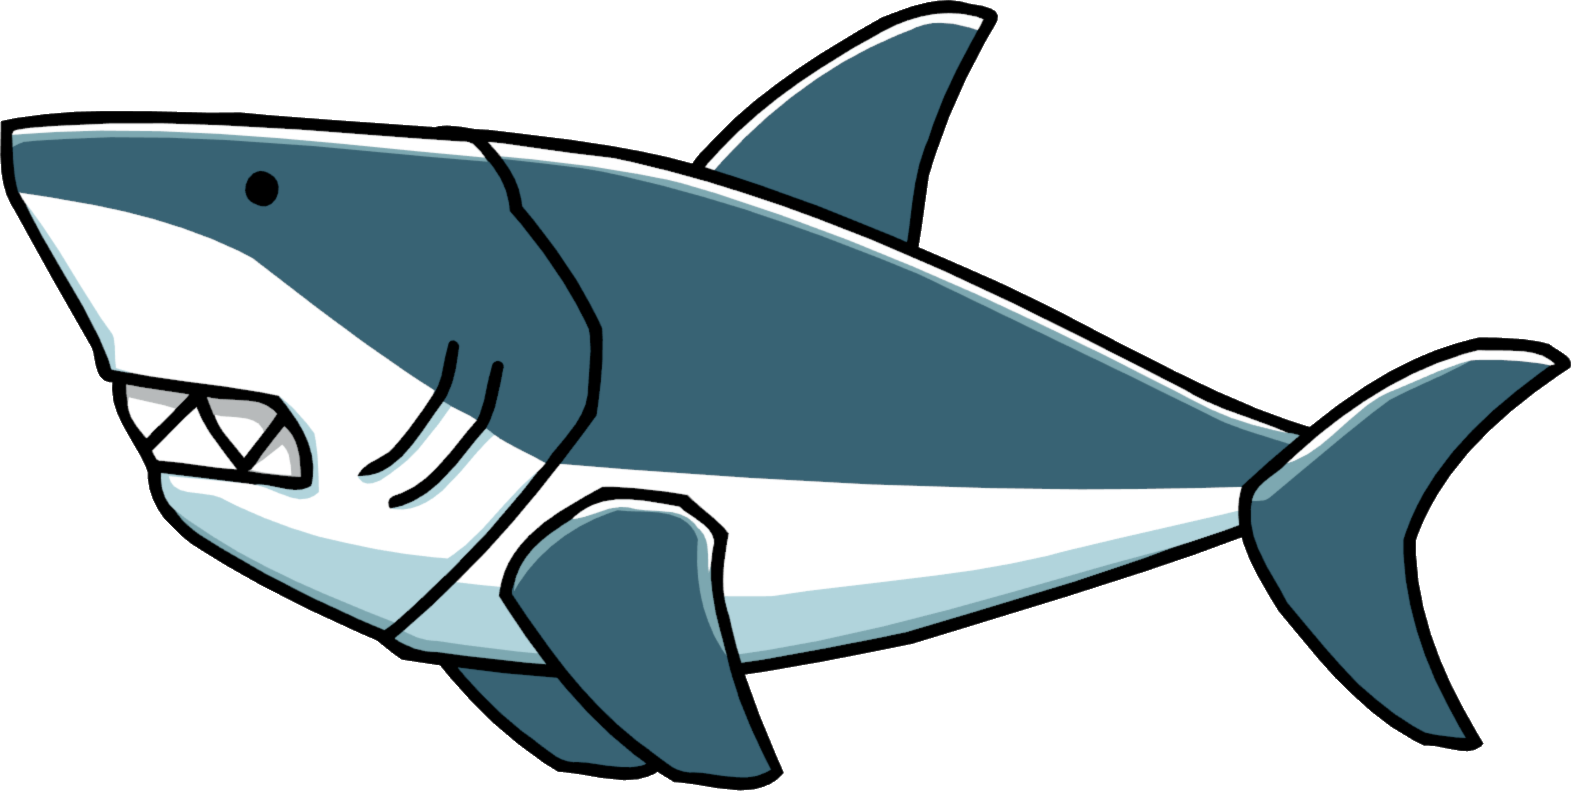 types of sharks clipart transparent